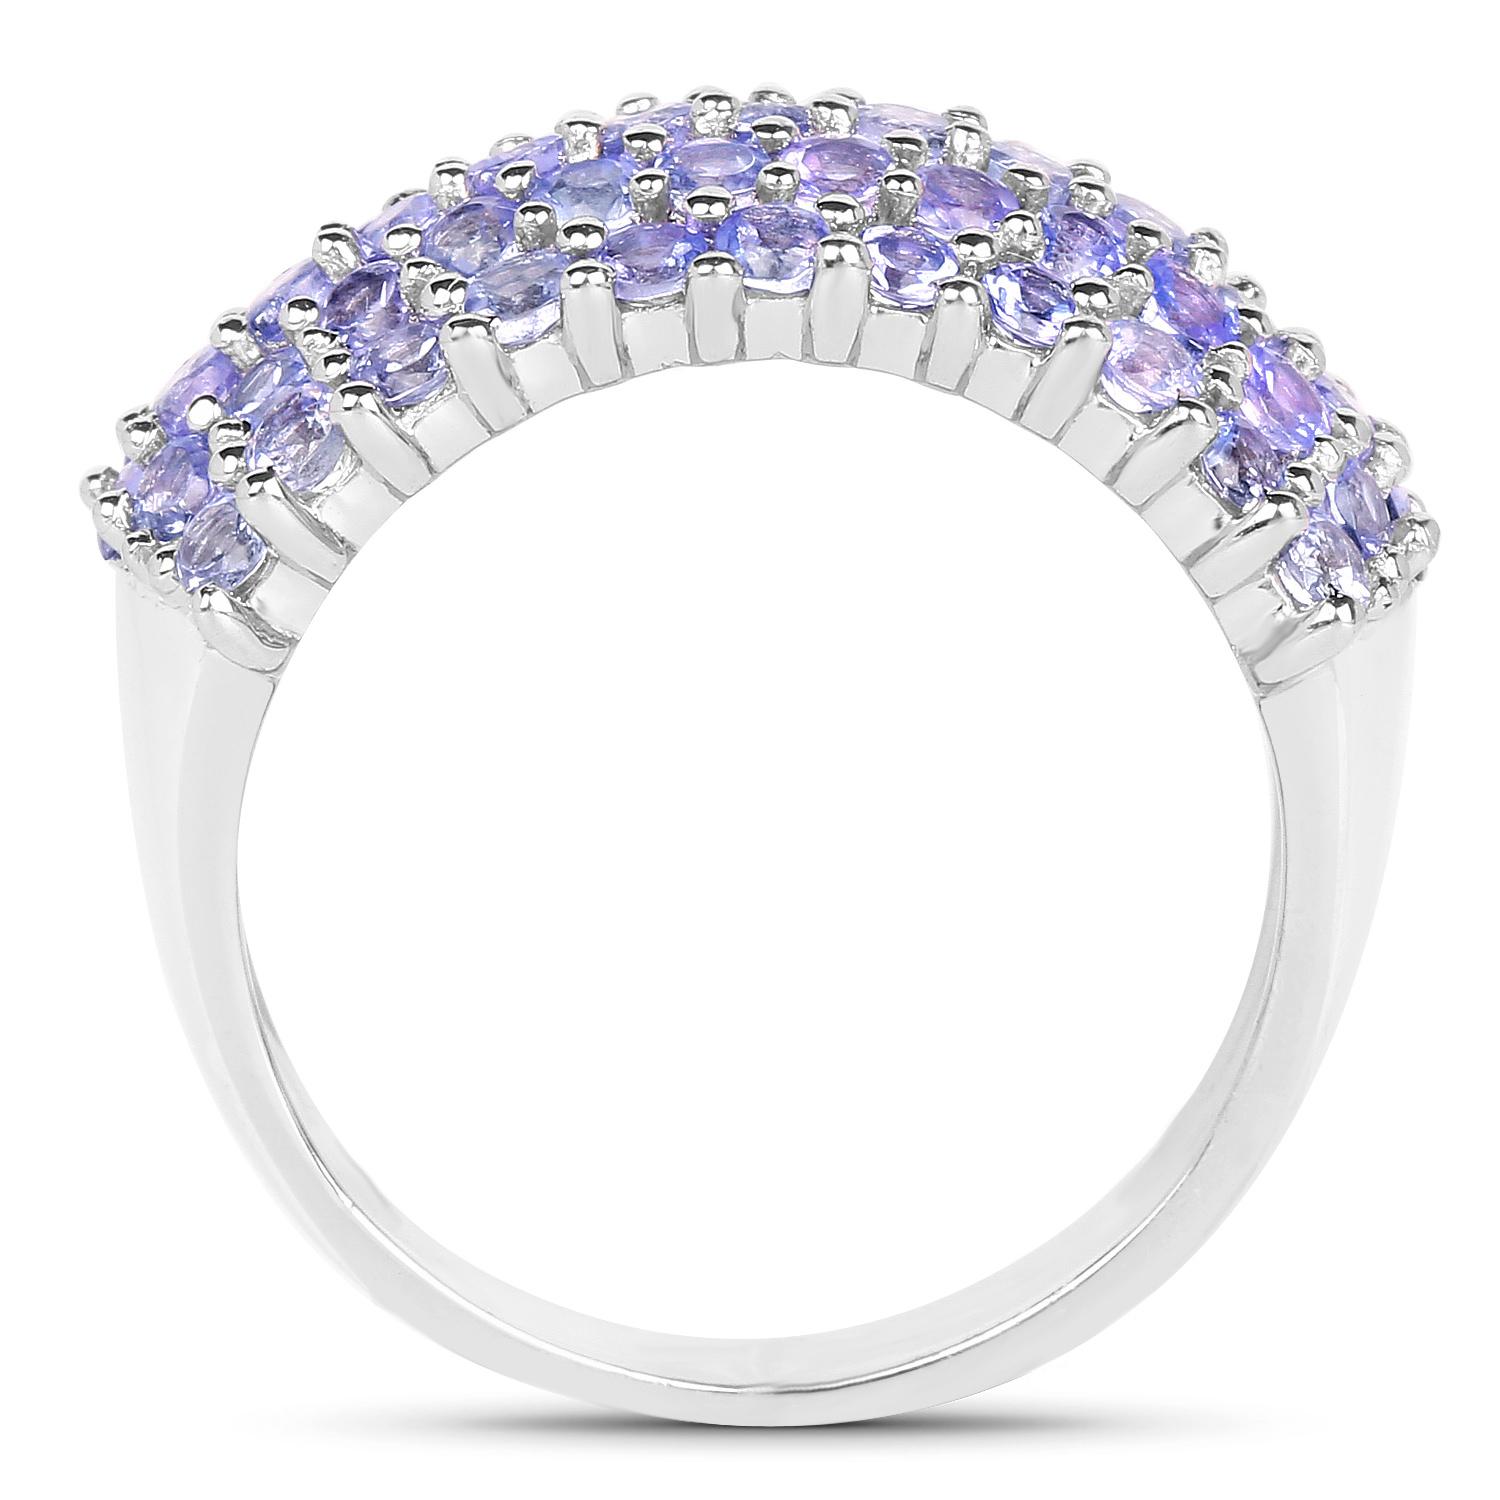 Tanzanite Cluster Ring 2.05 Carats Rhodium Plated Sterling Silver In Excellent Condition For Sale In Laguna Niguel, CA